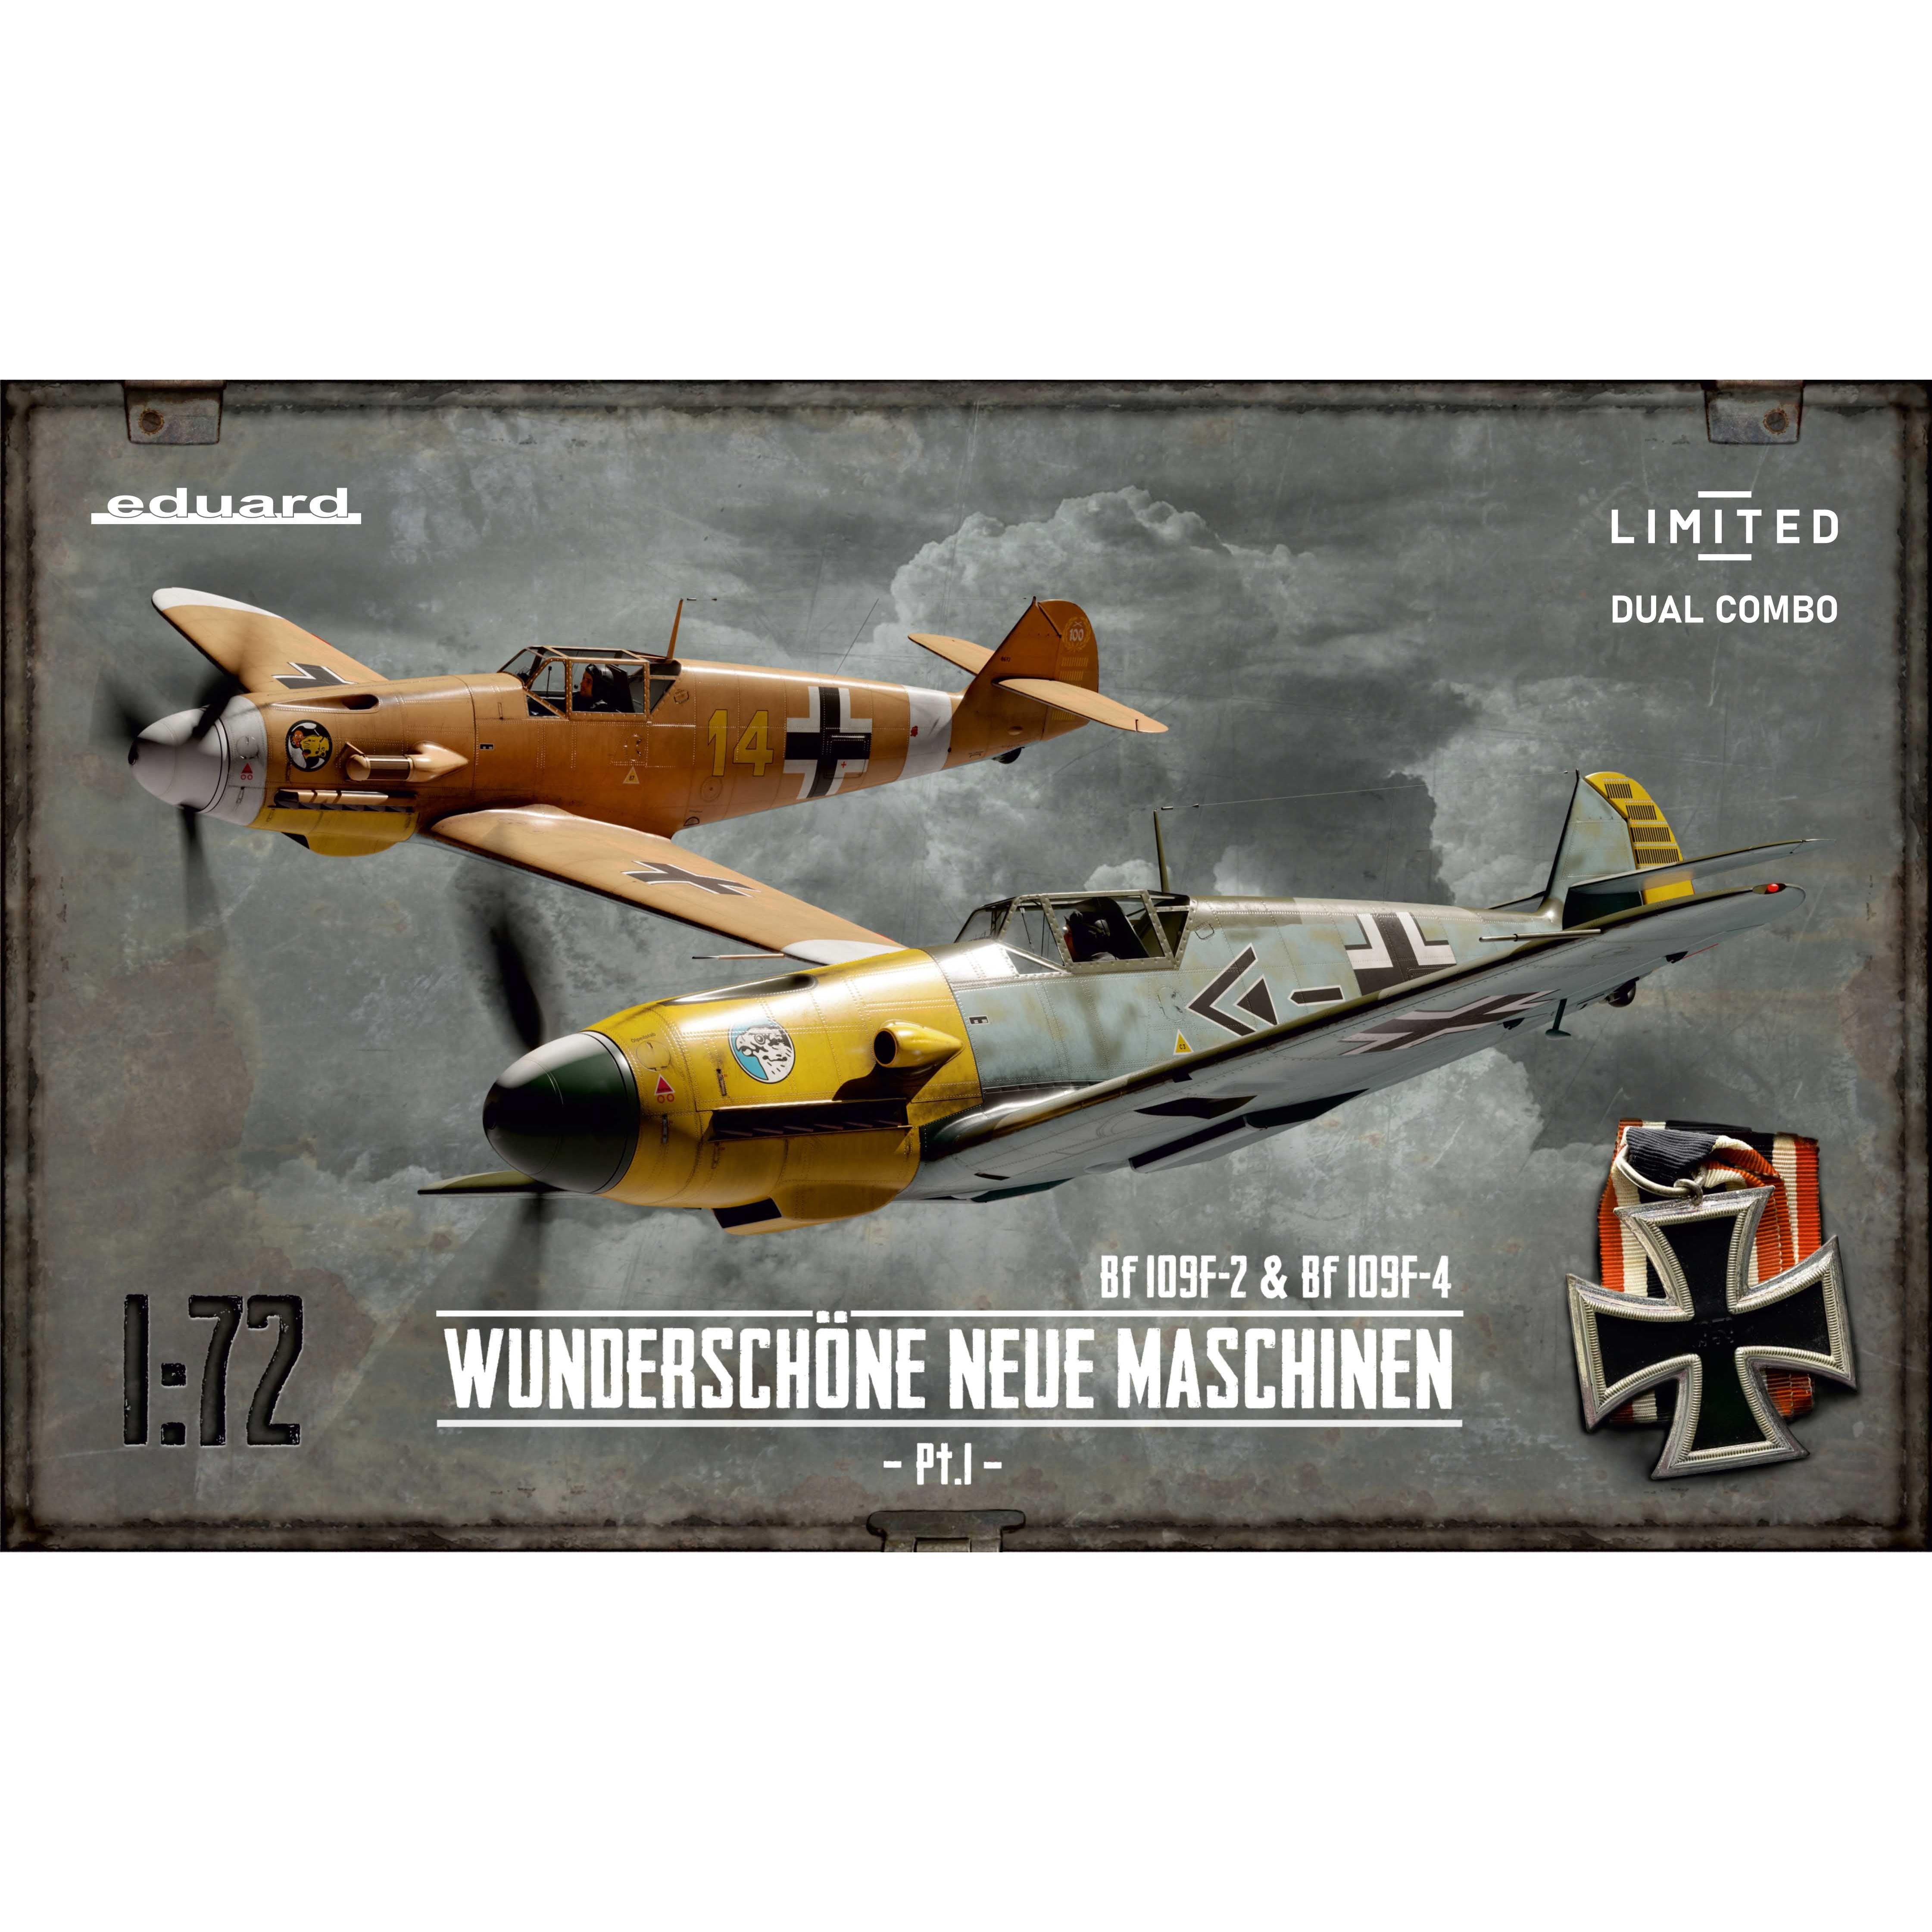 Wunderschone Neue Maschinen PT. 1 Dual Combo [Limited Edition] 1/72 #2142 by Eduard